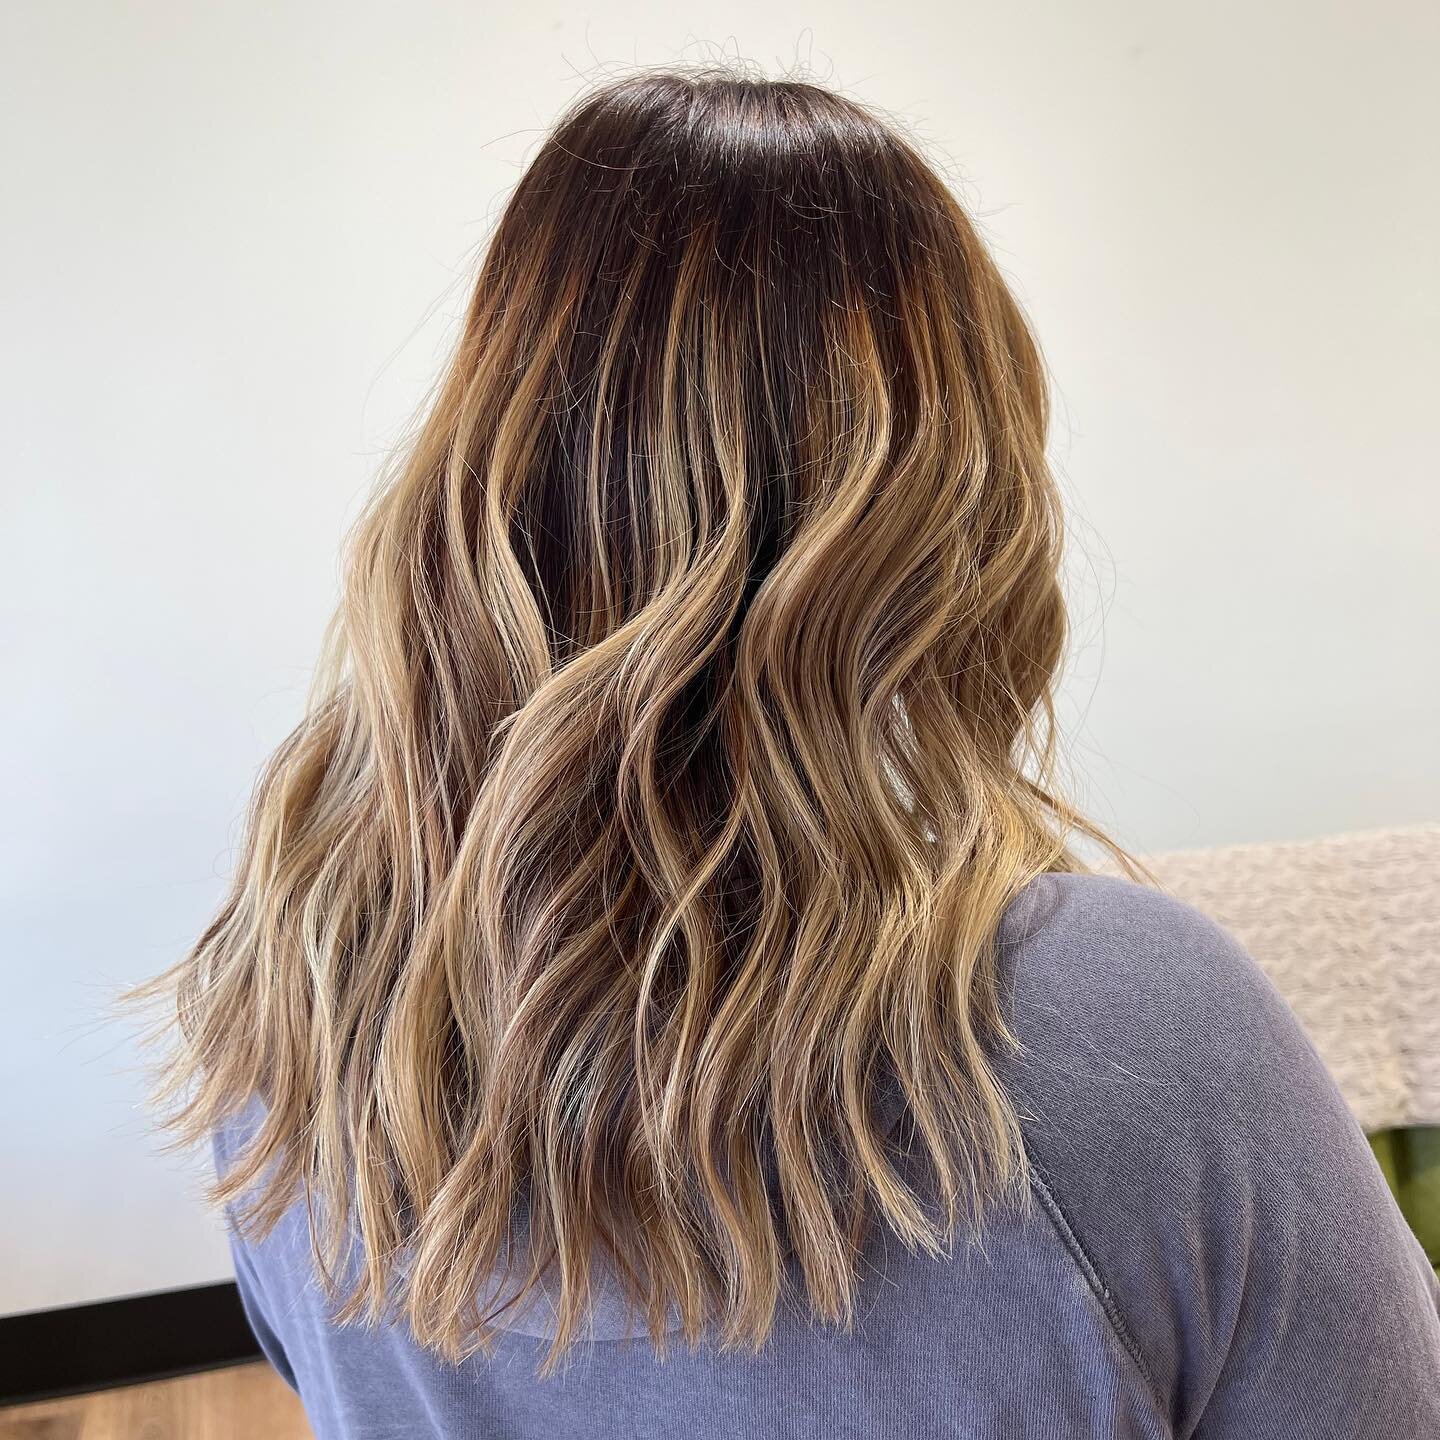 how do you take your coffee??☕️⁠
_________________________⁠
@stylesbyalli⁠
.⁠
.⁠
#balayage #highlights #livedincolor #coffeehaircolor #haircolor #blended #behindthechair #randco #kerastase #blondemelightener #redkenshadeseq #westminstersalon #westmin